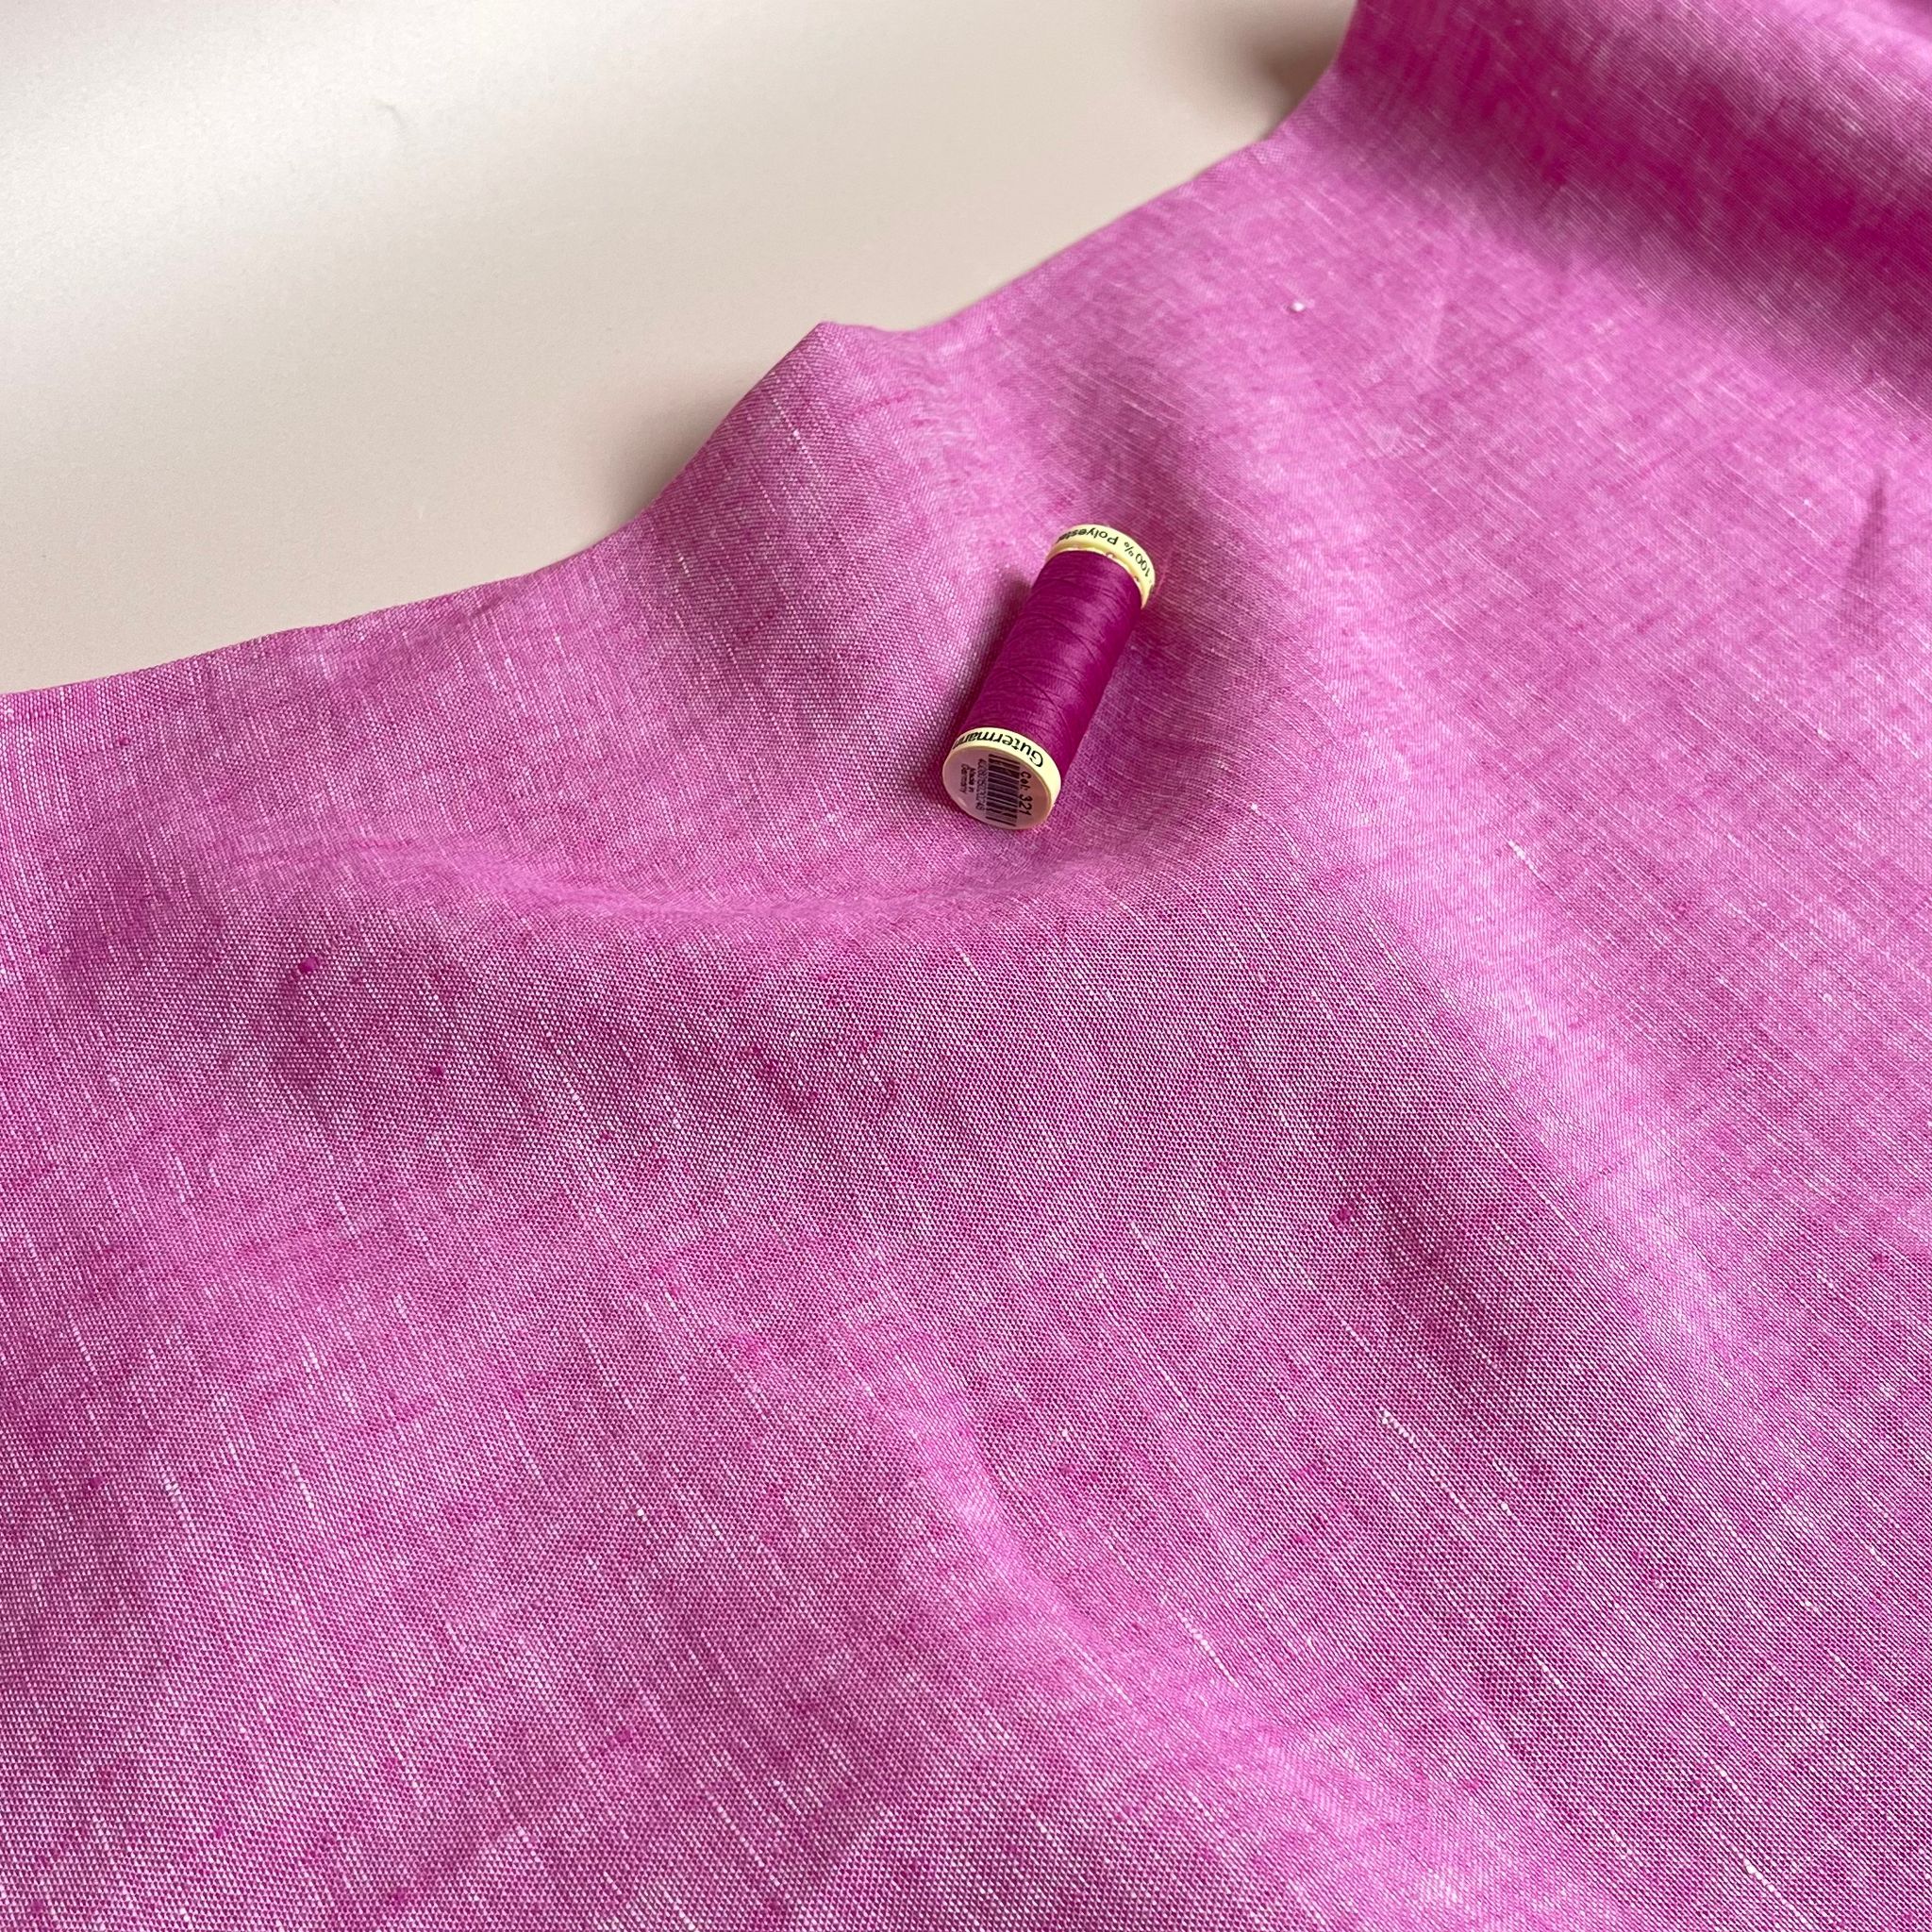 REMNANT 0.89 Metre - Fuchsia Yarn Dyed Pure Linen Fabric